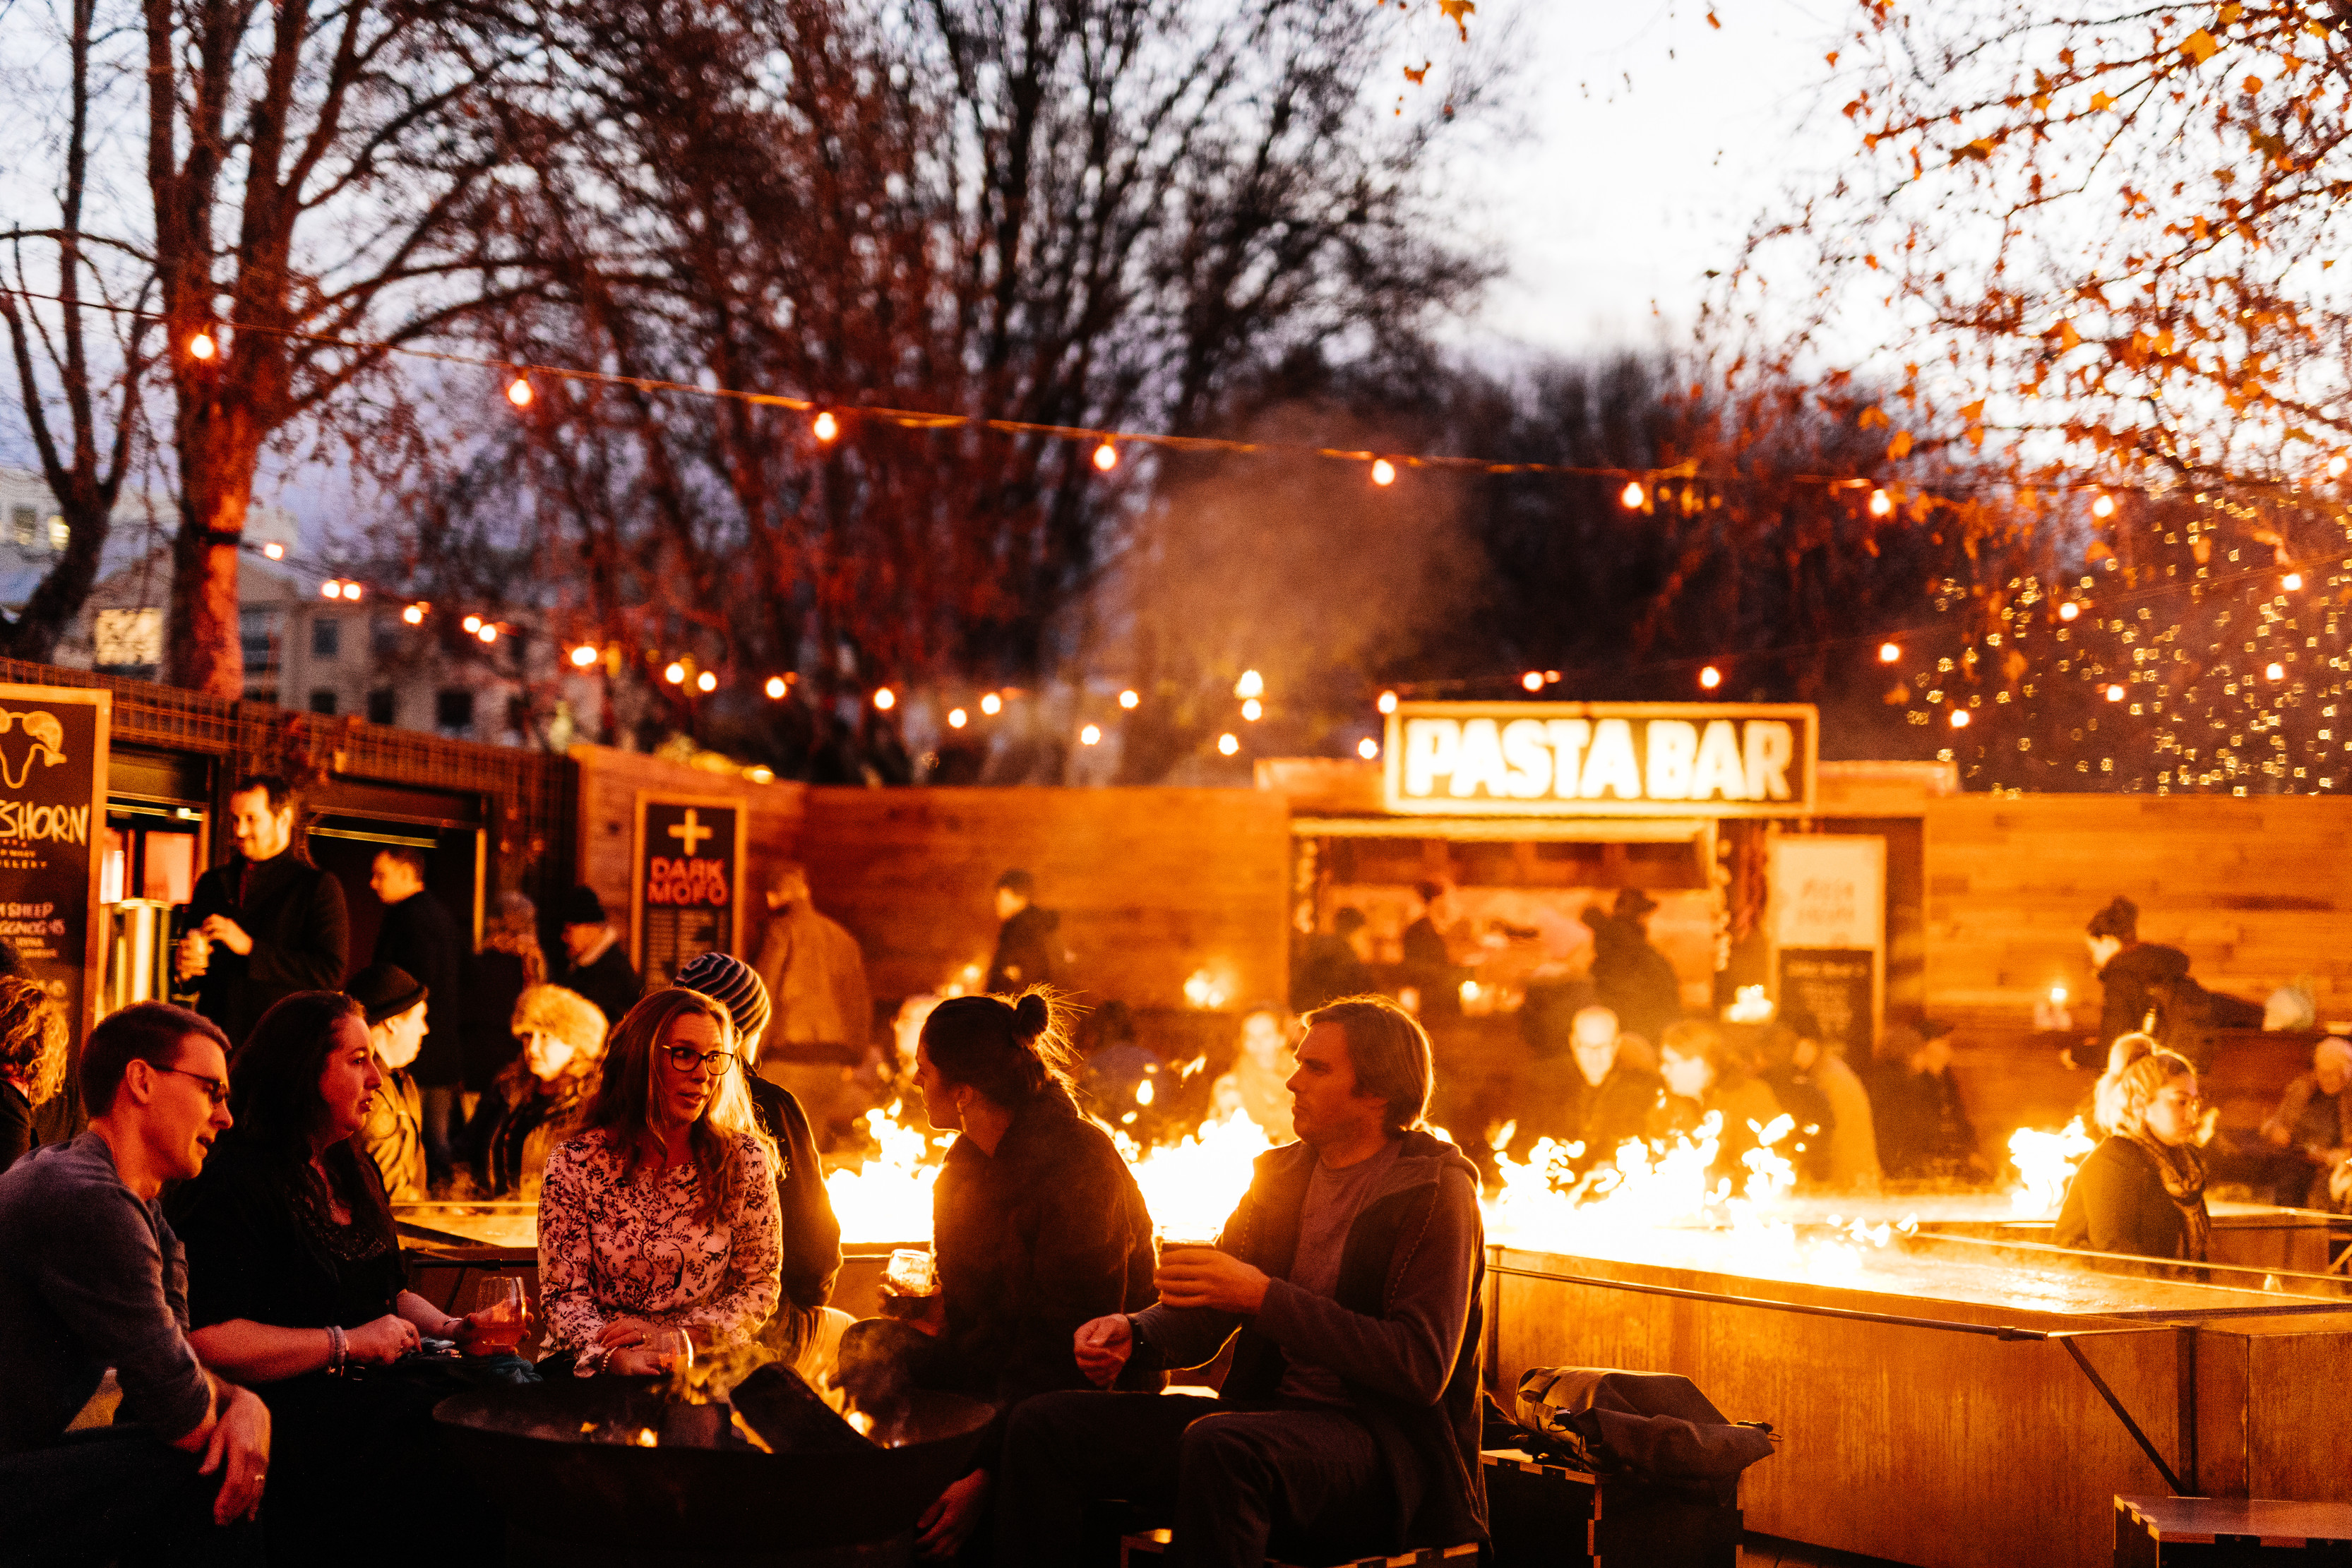 Crowds enjoy food at Dark Mofo: Winter Feast. There is a burning fire in the center and lots of food stalls around the outside.